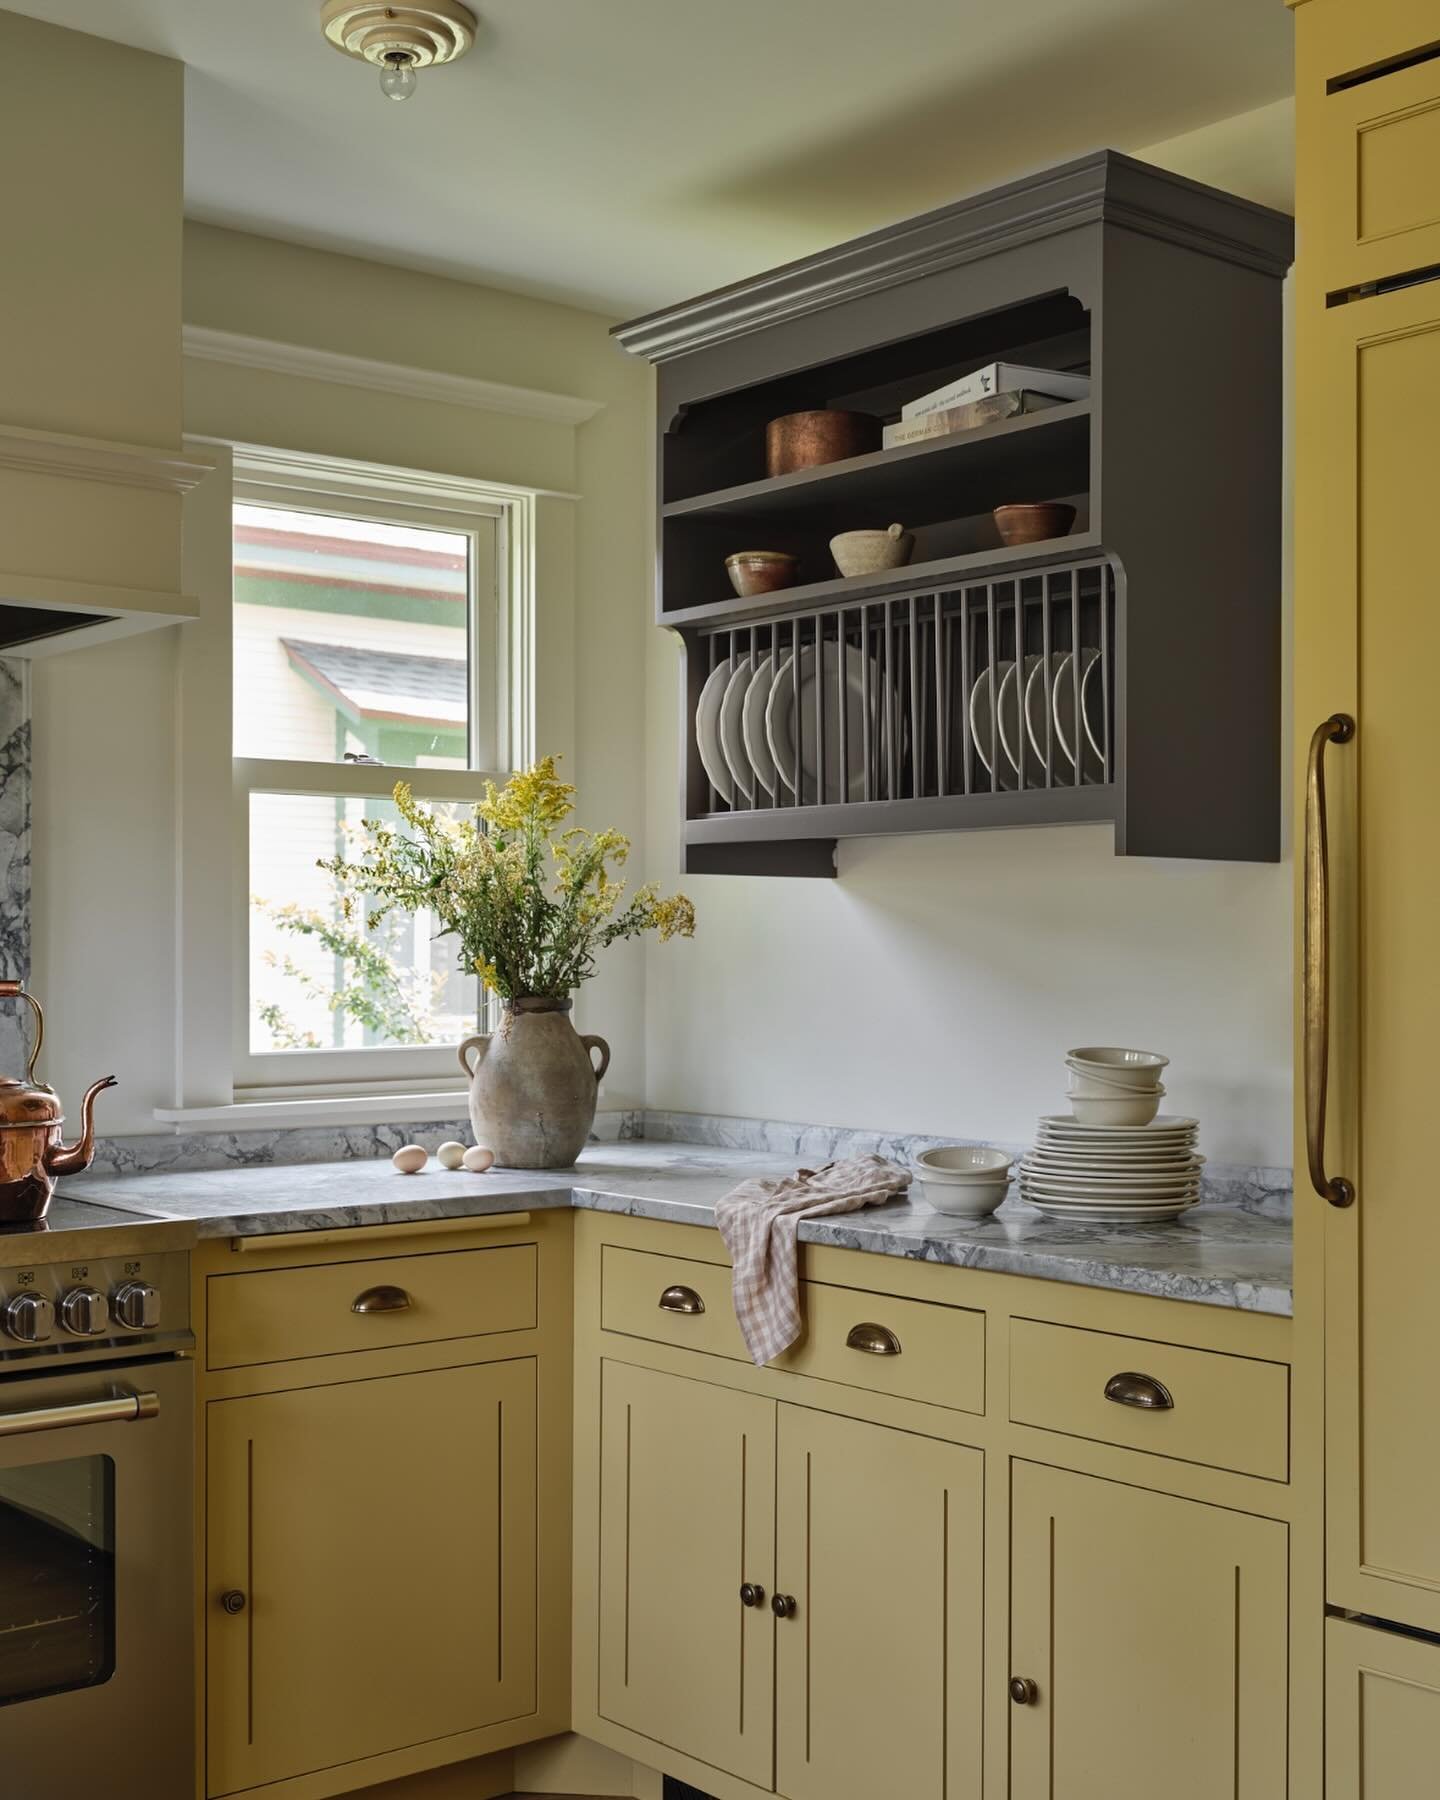 Design a kitchen but make it yellow 💛. Our clients came to us looking for a kitchen that was anything but the usual colors - after going through the paint deck a few times we landed on the sunniest shade of yellow paired with the muddiest purple and